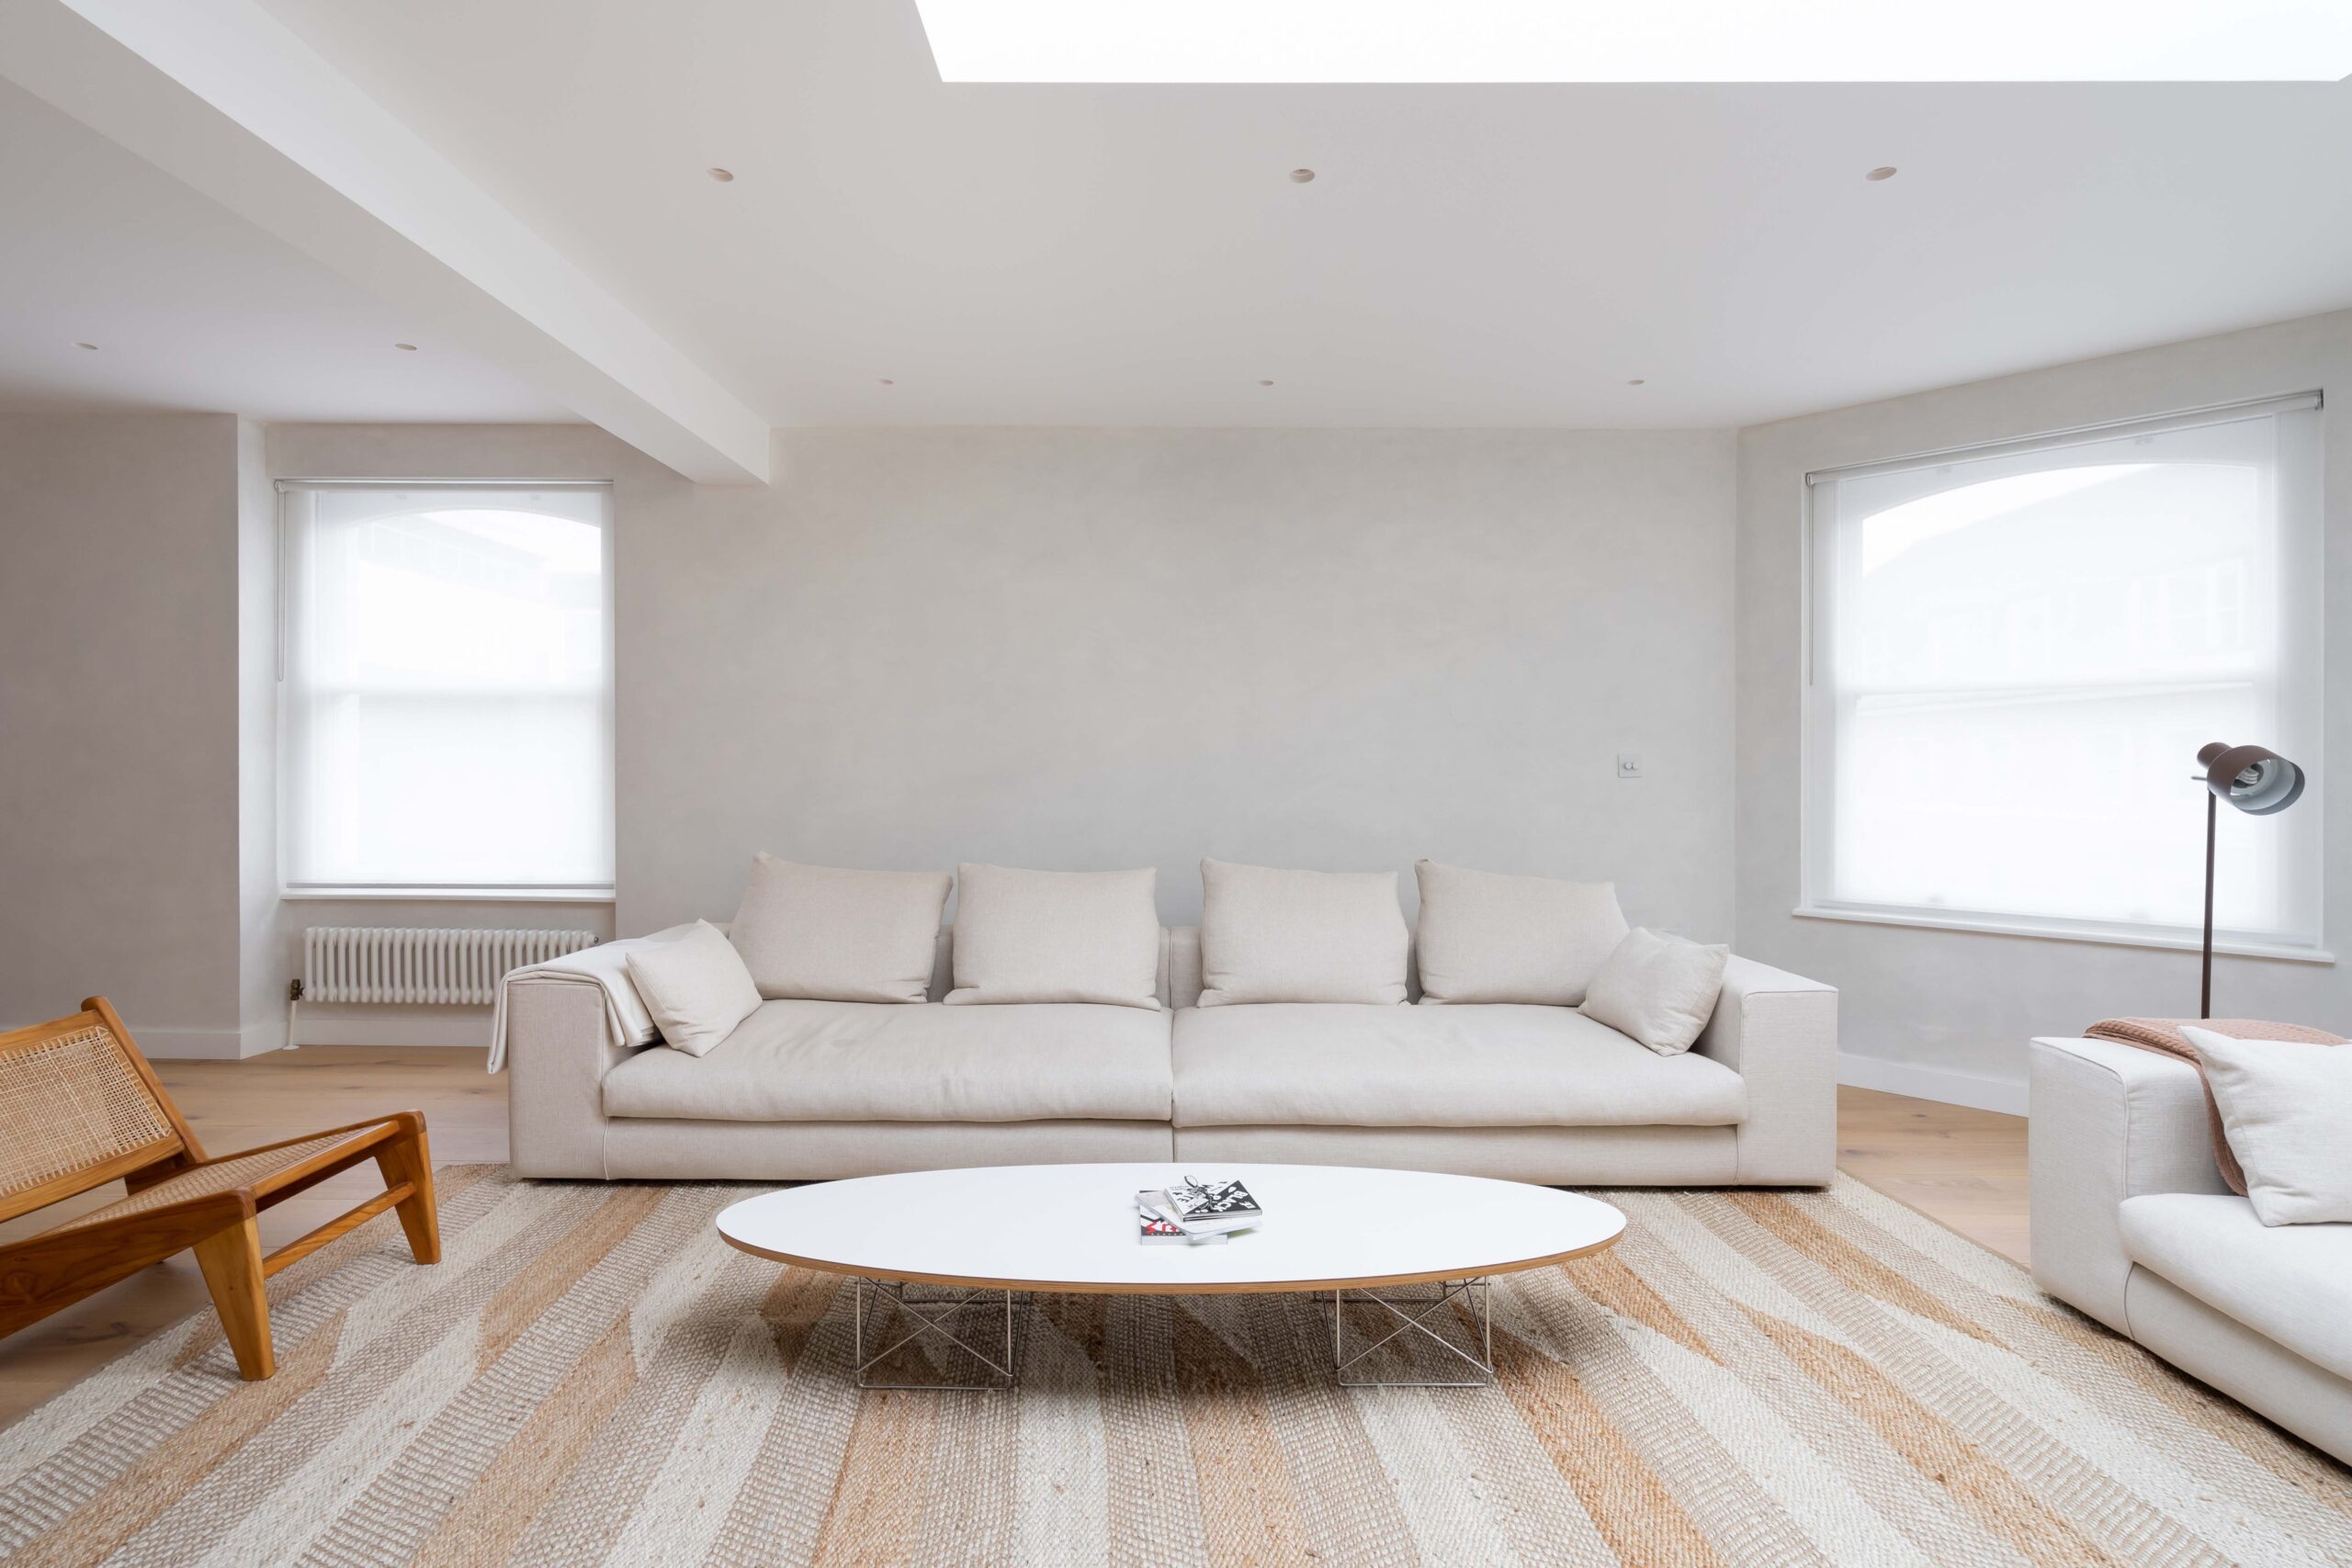 For Sale: Westbourne Grove Notting Hill W11 living room with Scandi interior design and skylights